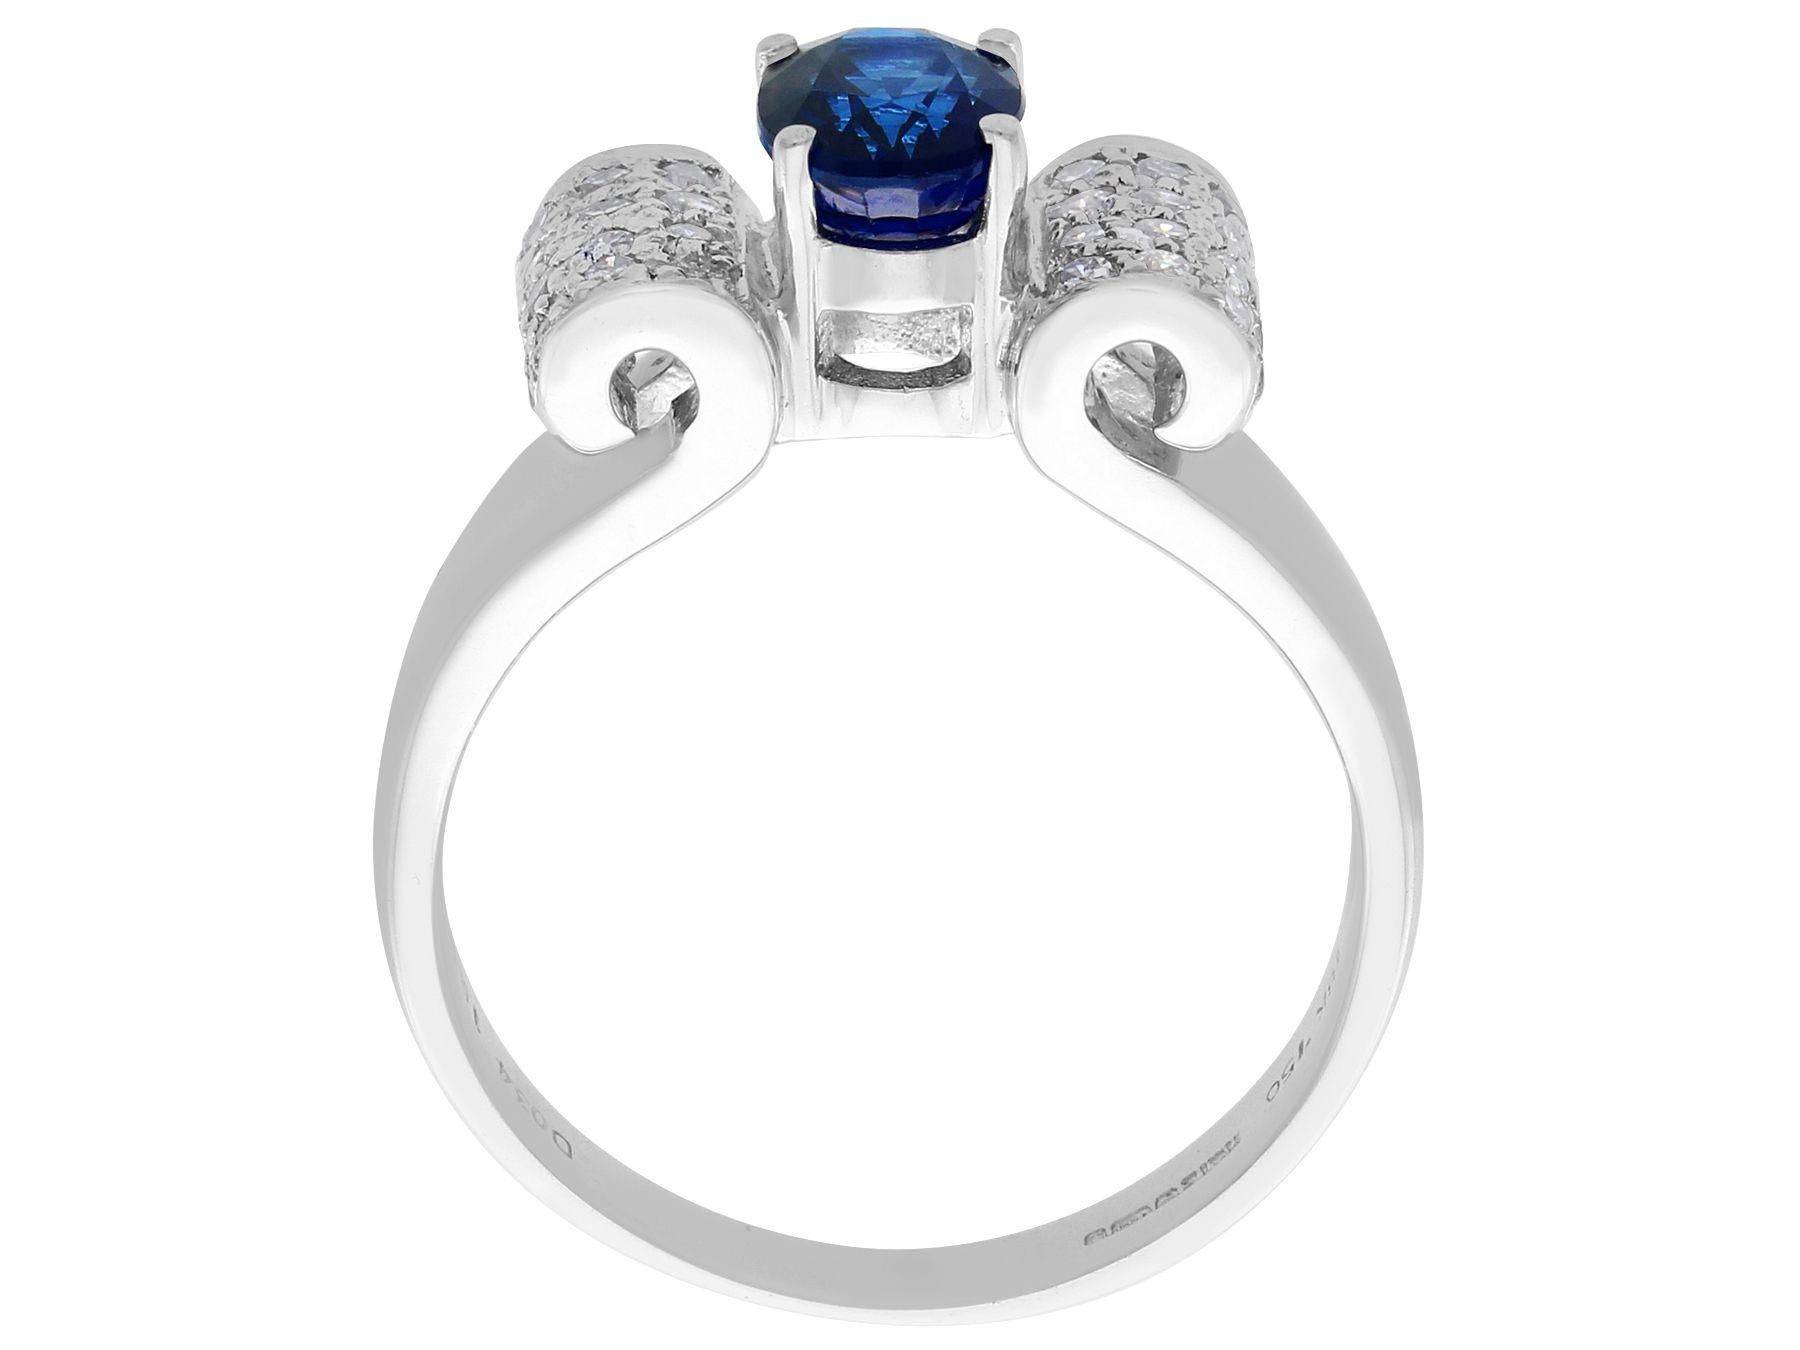 Women's 1990 Vintage 1.69 Carat Sapphire and Diamond and White Gold Cocktail Ring